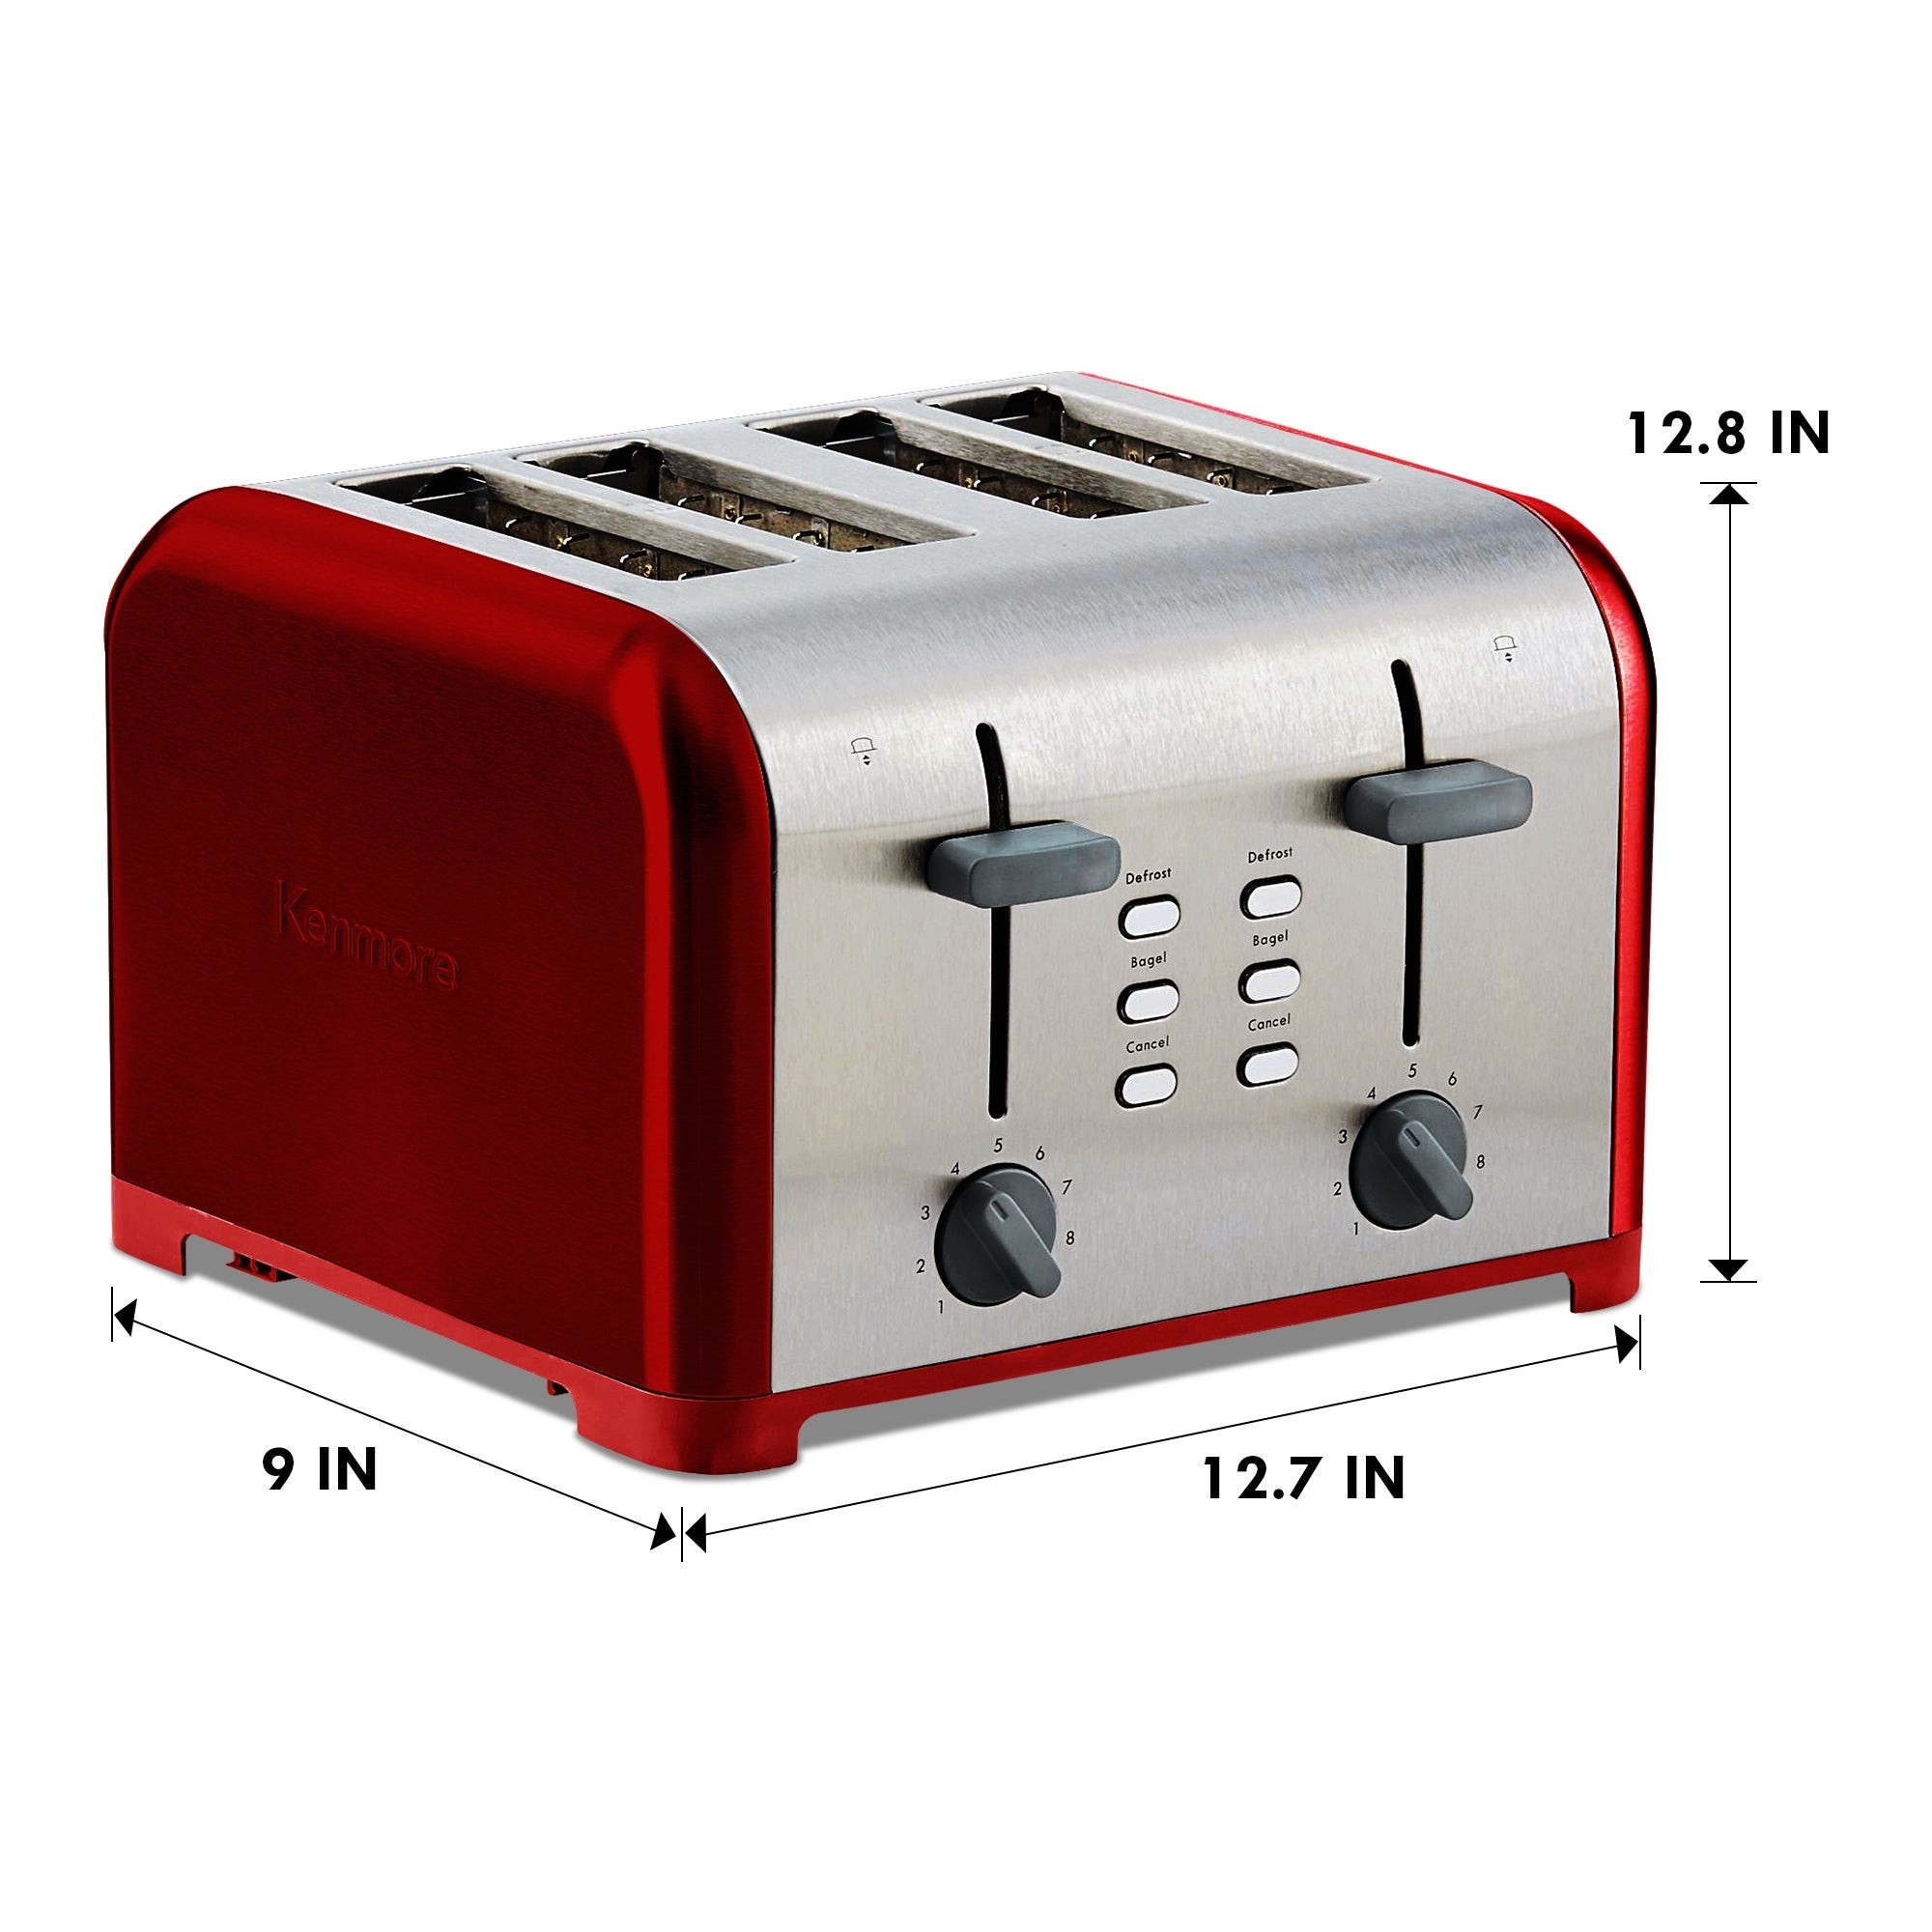 https://ak1.ostkcdn.com/images/products/is/images/direct/7113d01529efb1fcf60e9392da6f8724f2d29751/Kenmore-4-Slice-Toaster-with-Dual-Controls%2C-Red.jpg